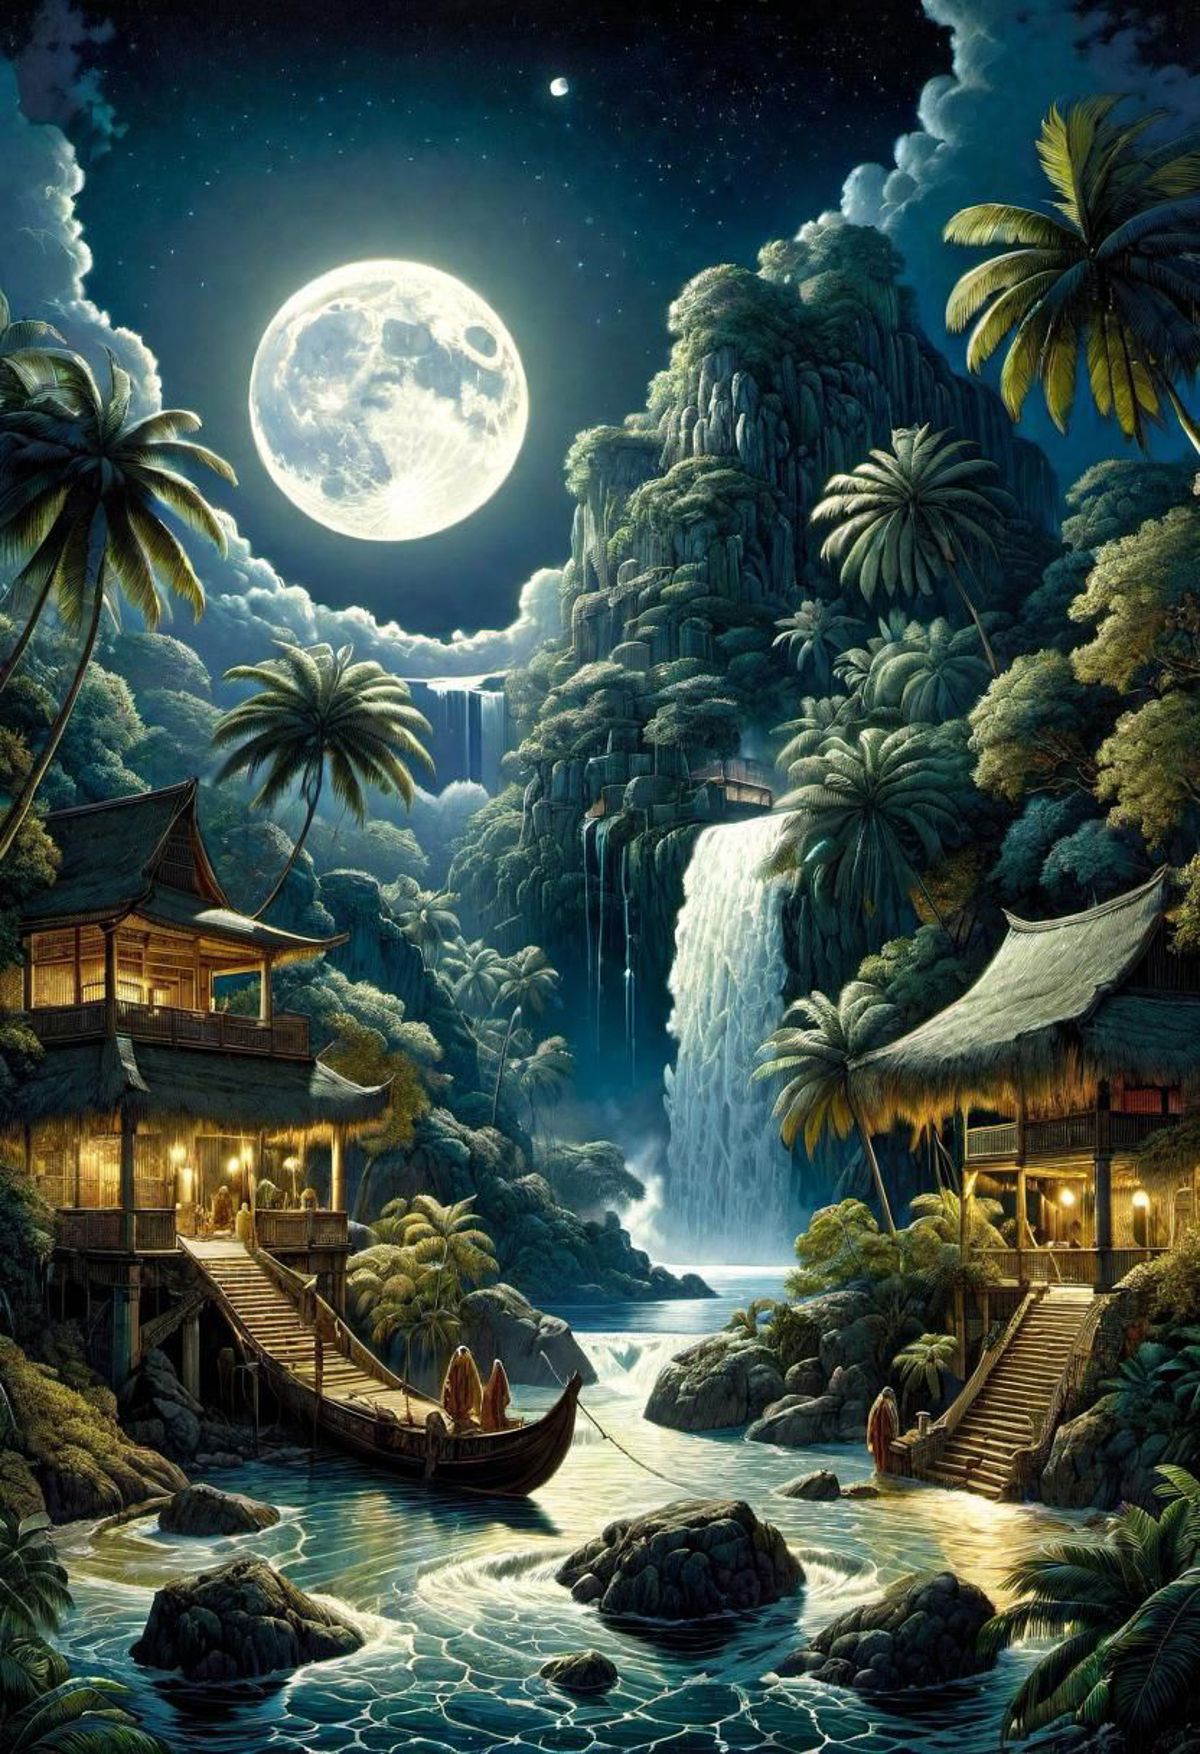 A beautiful painting of a tropical island with a moonlit waterfall, boats, and people.